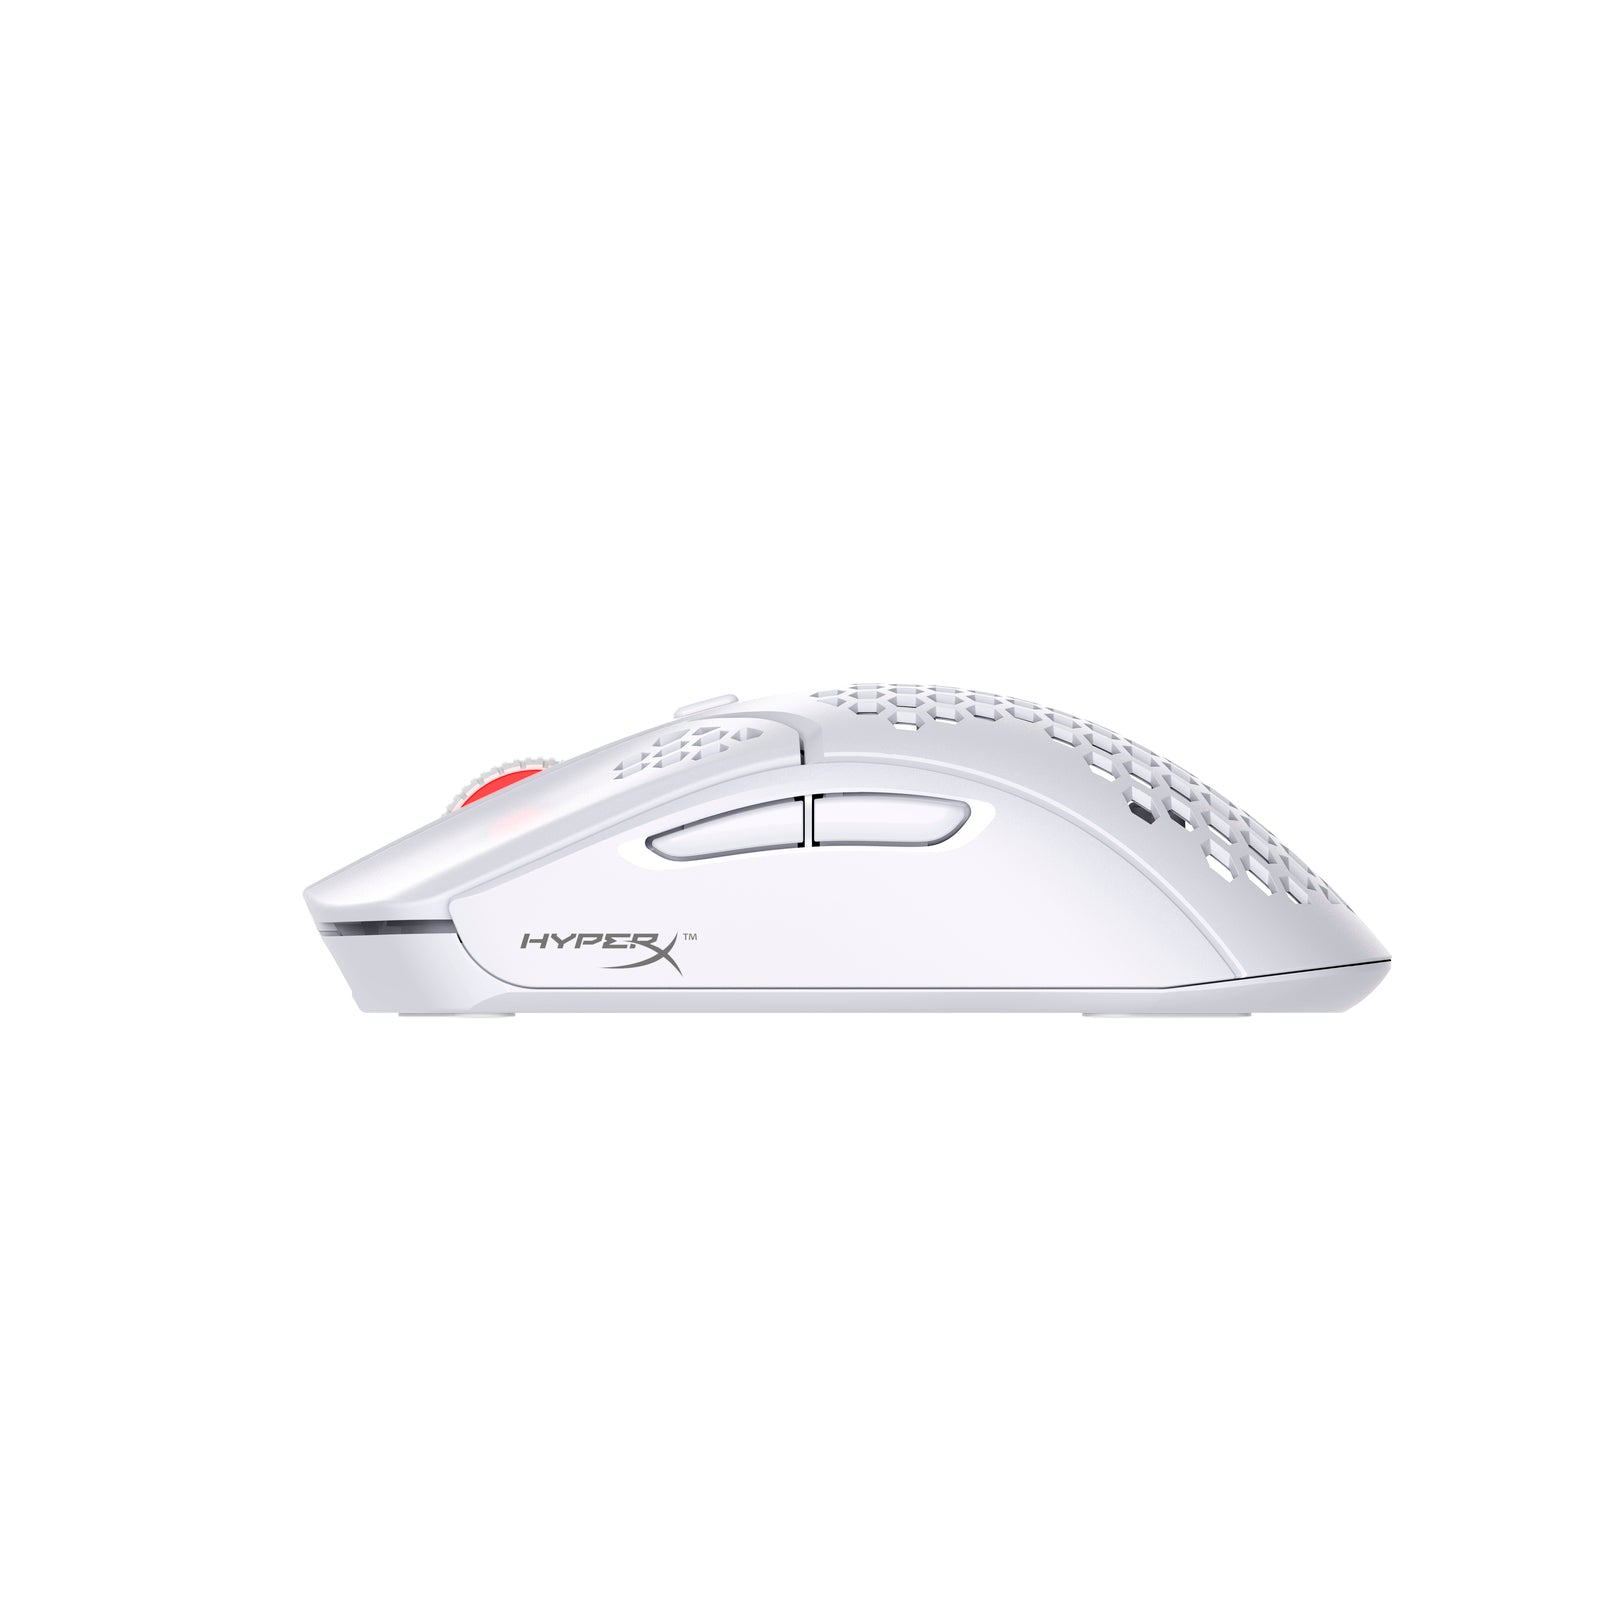 Pulsefire Haste Wireless Gaming Mouse